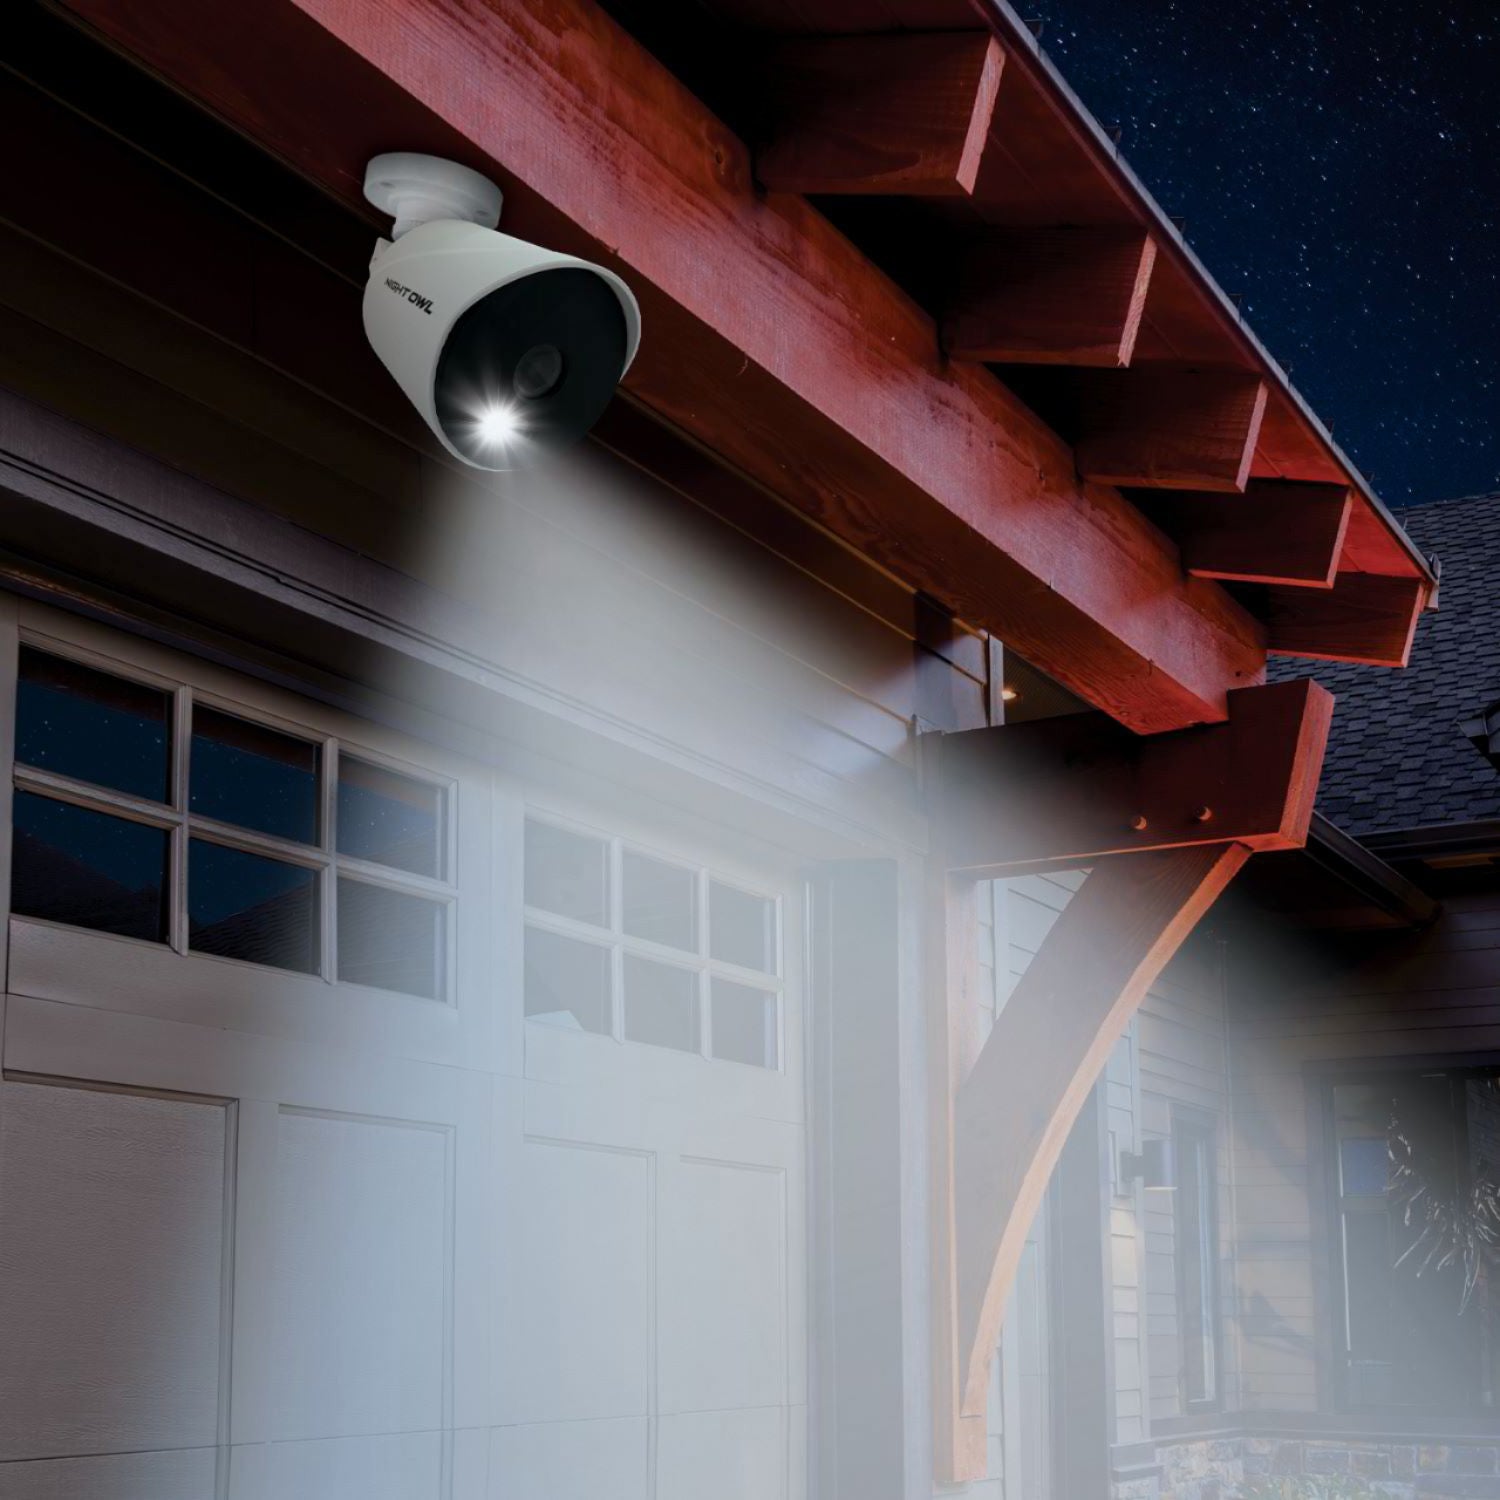 Secure Your Home with Smart Home Security Systems